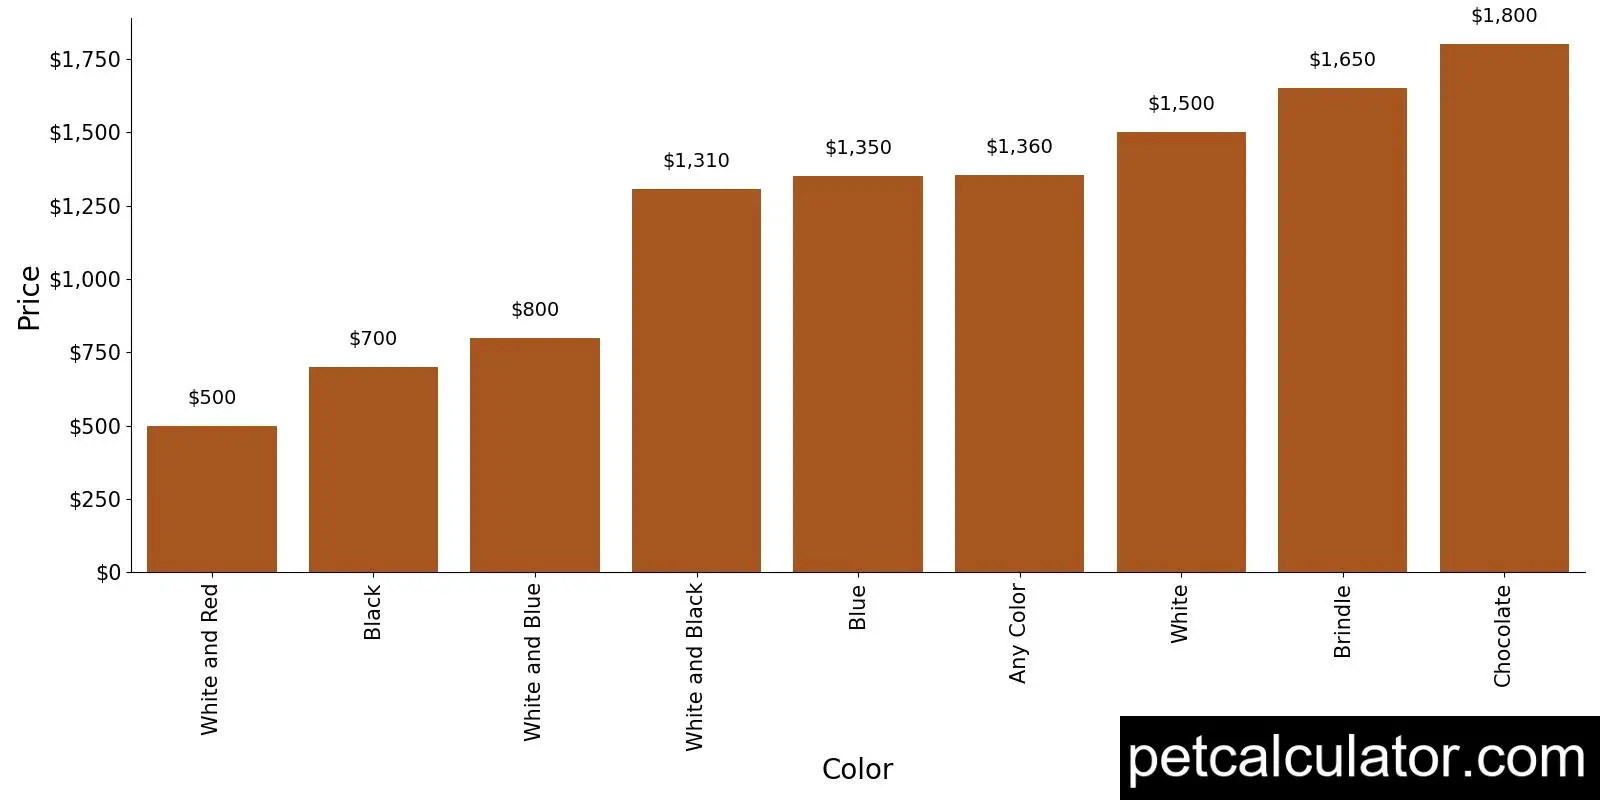 Price of Border Terrier by Color 